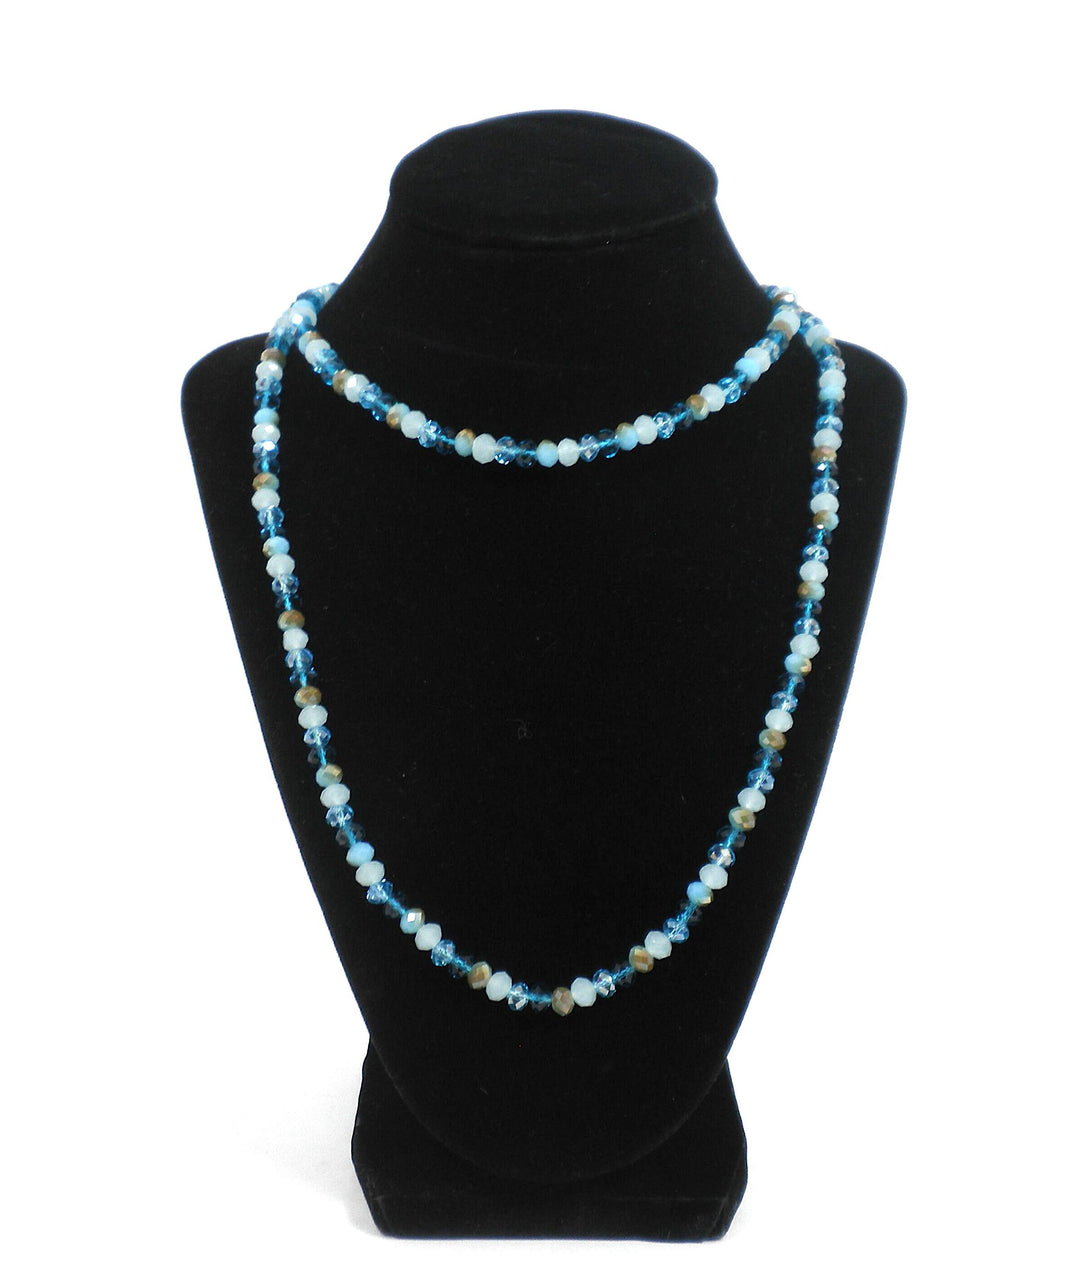 Long Multi-Colored Blue Beaded Necklace - The Fashion Foundation